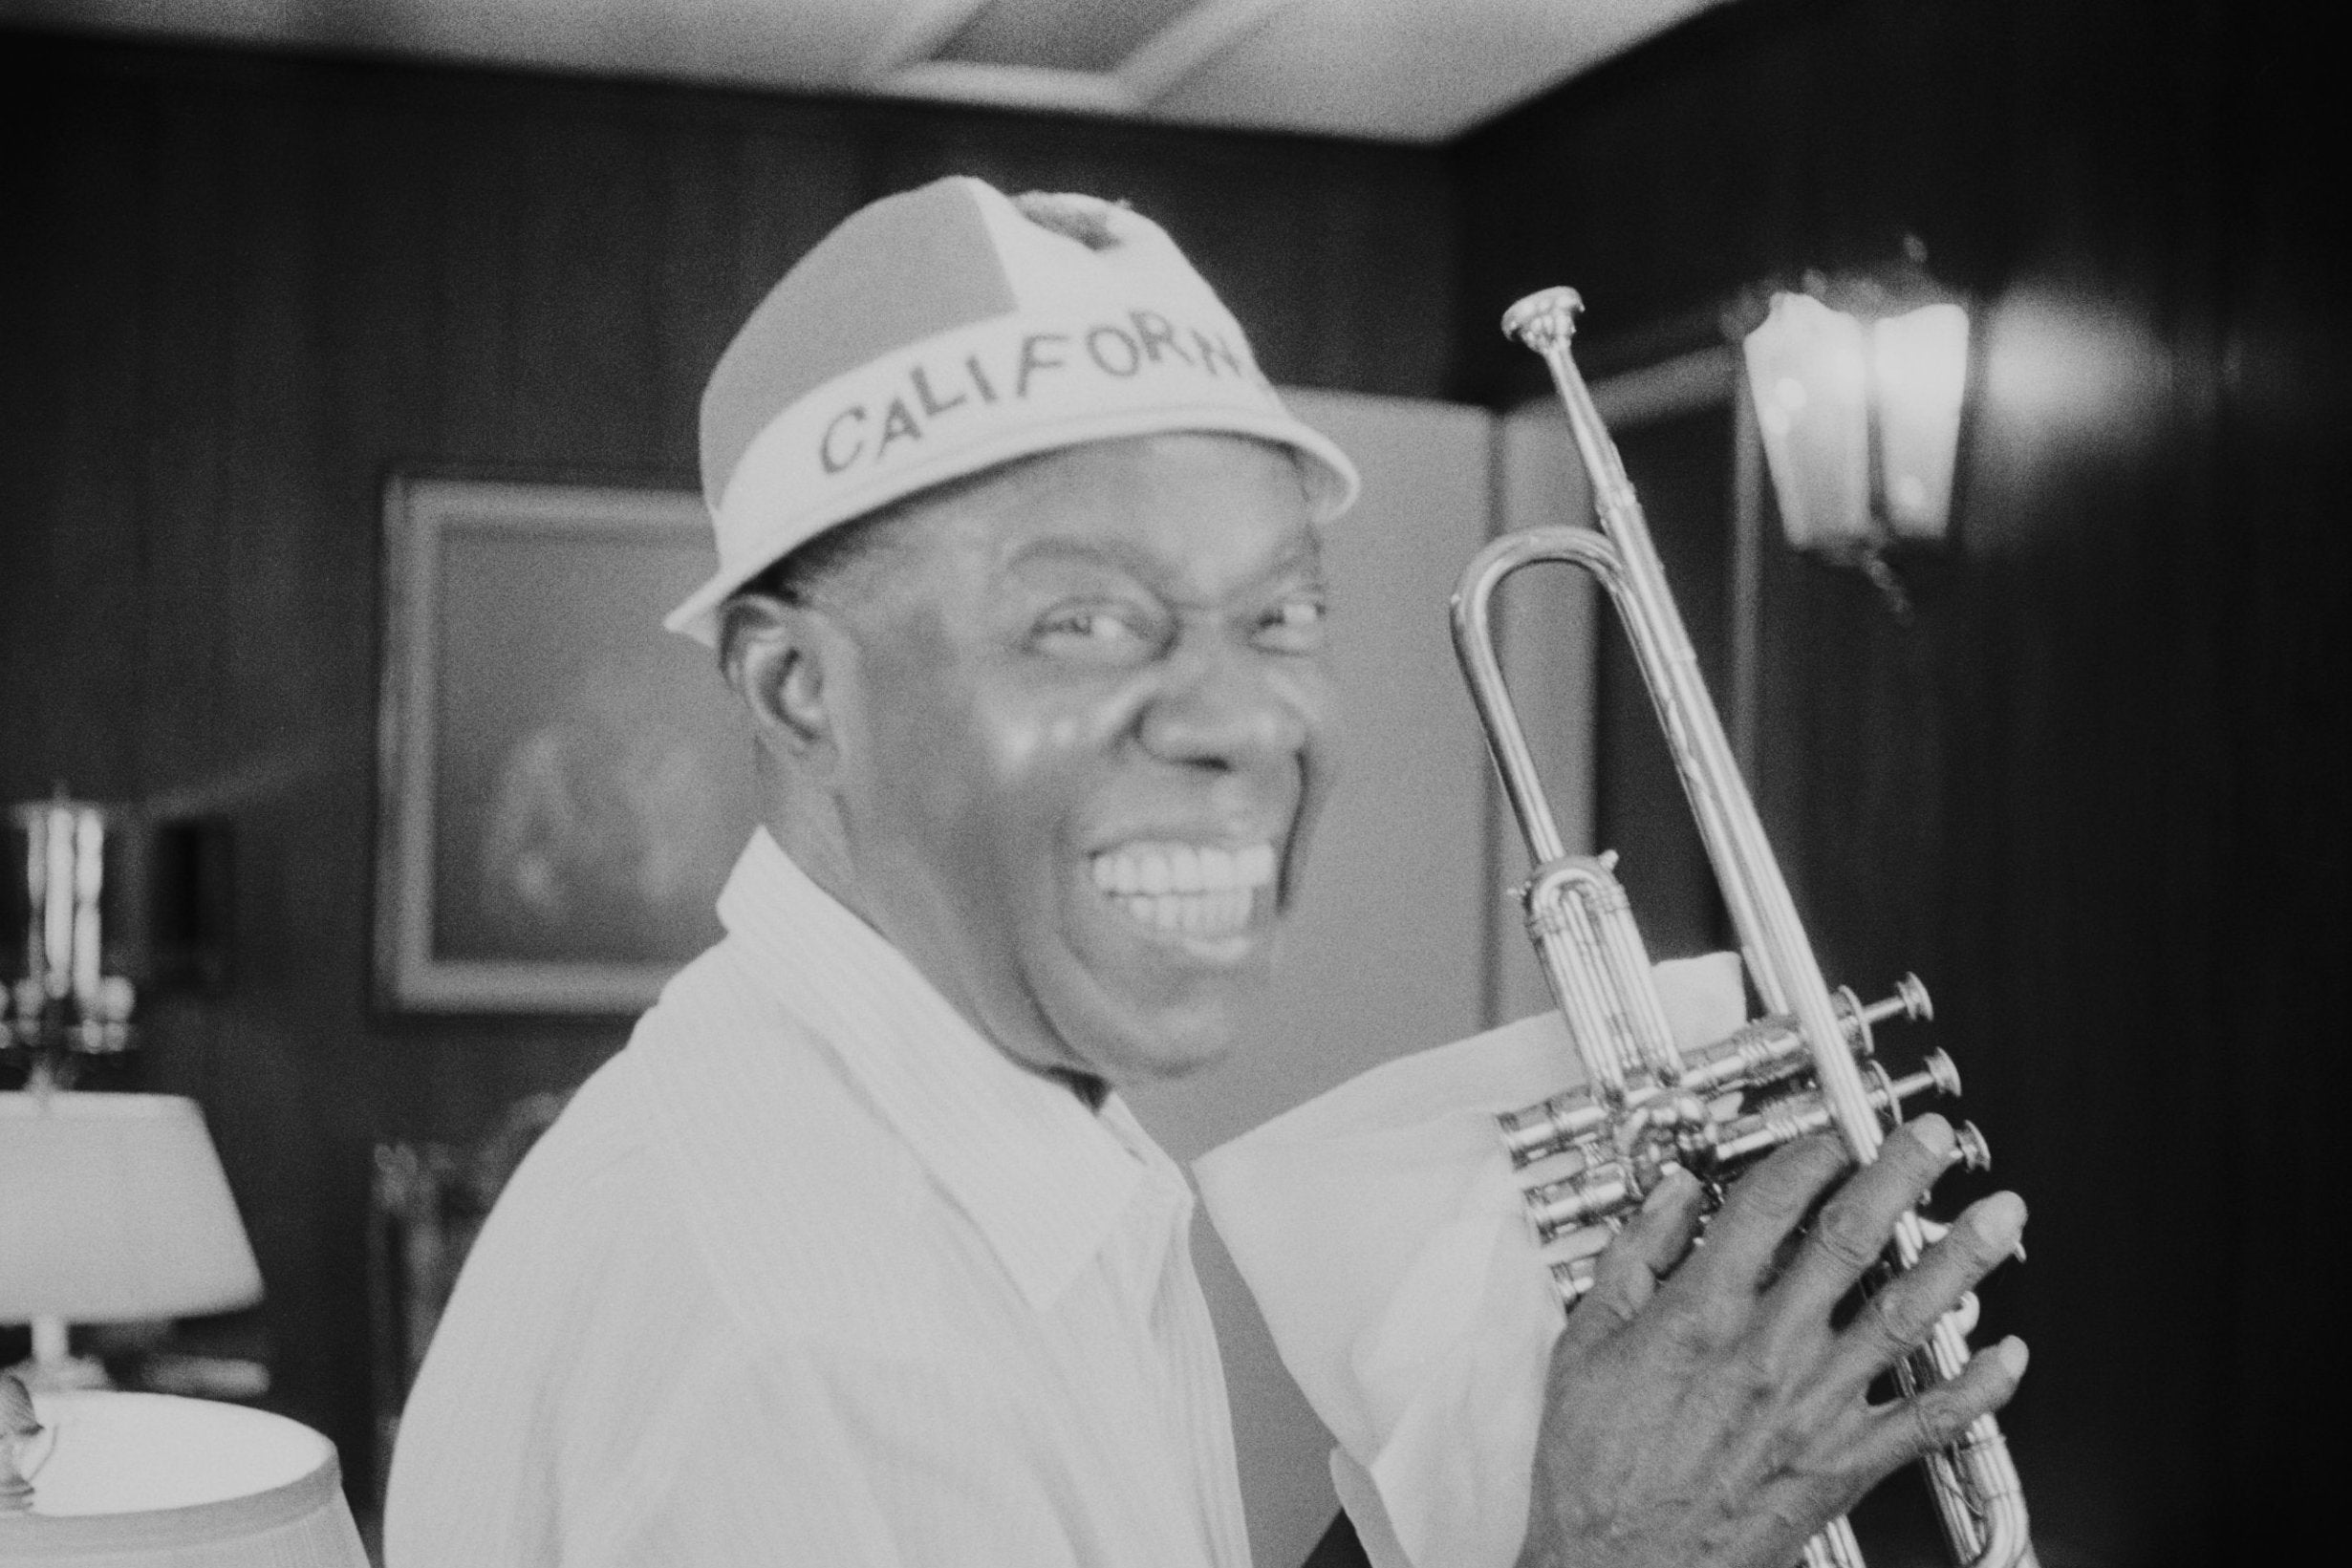 From Reel to Real: Louis Armstrong and Personal Recording